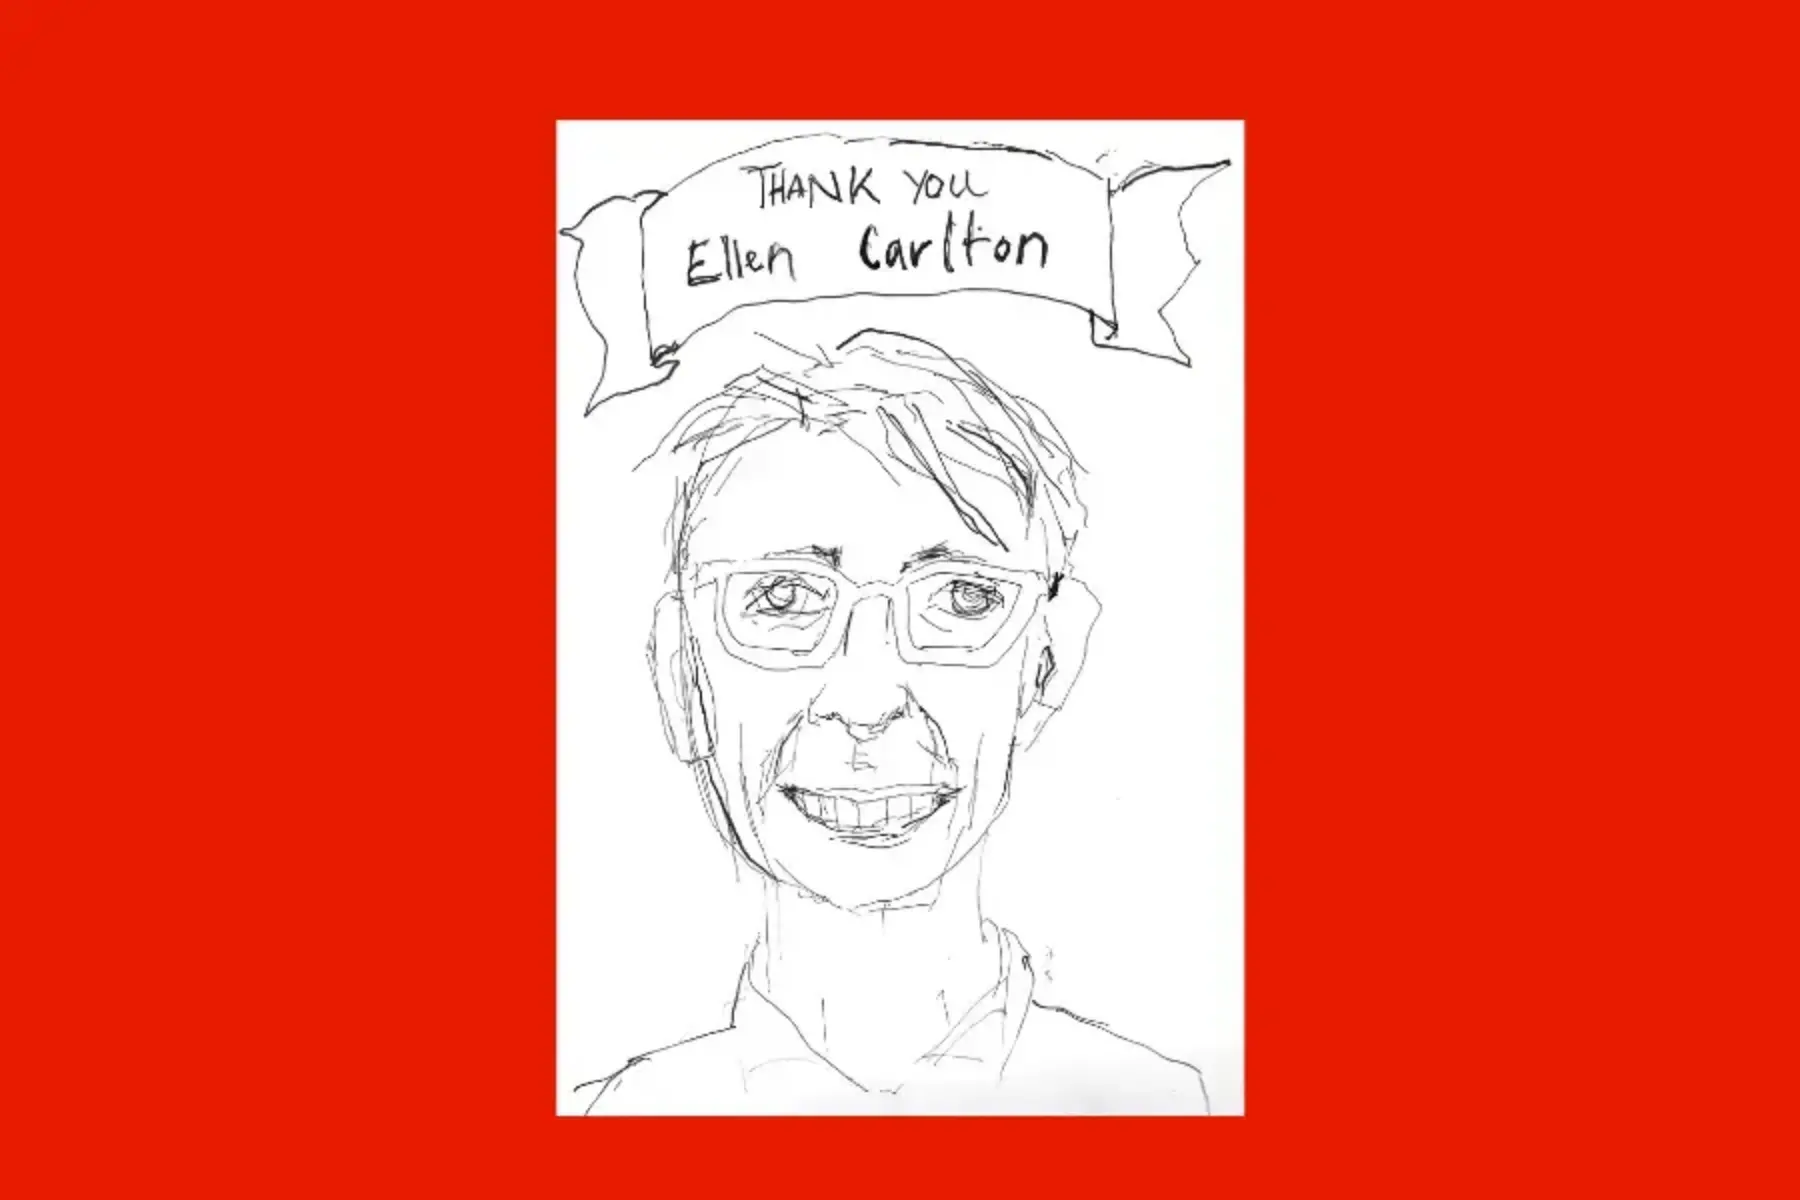 Red background with a drawing in the middle. The drawing has a white background with black sketching of a person with short hair and glasses. The person is smiling. The portrait includes the top of their shoulders. Above the person’s head is a banner that reads thank you ellen carlton.